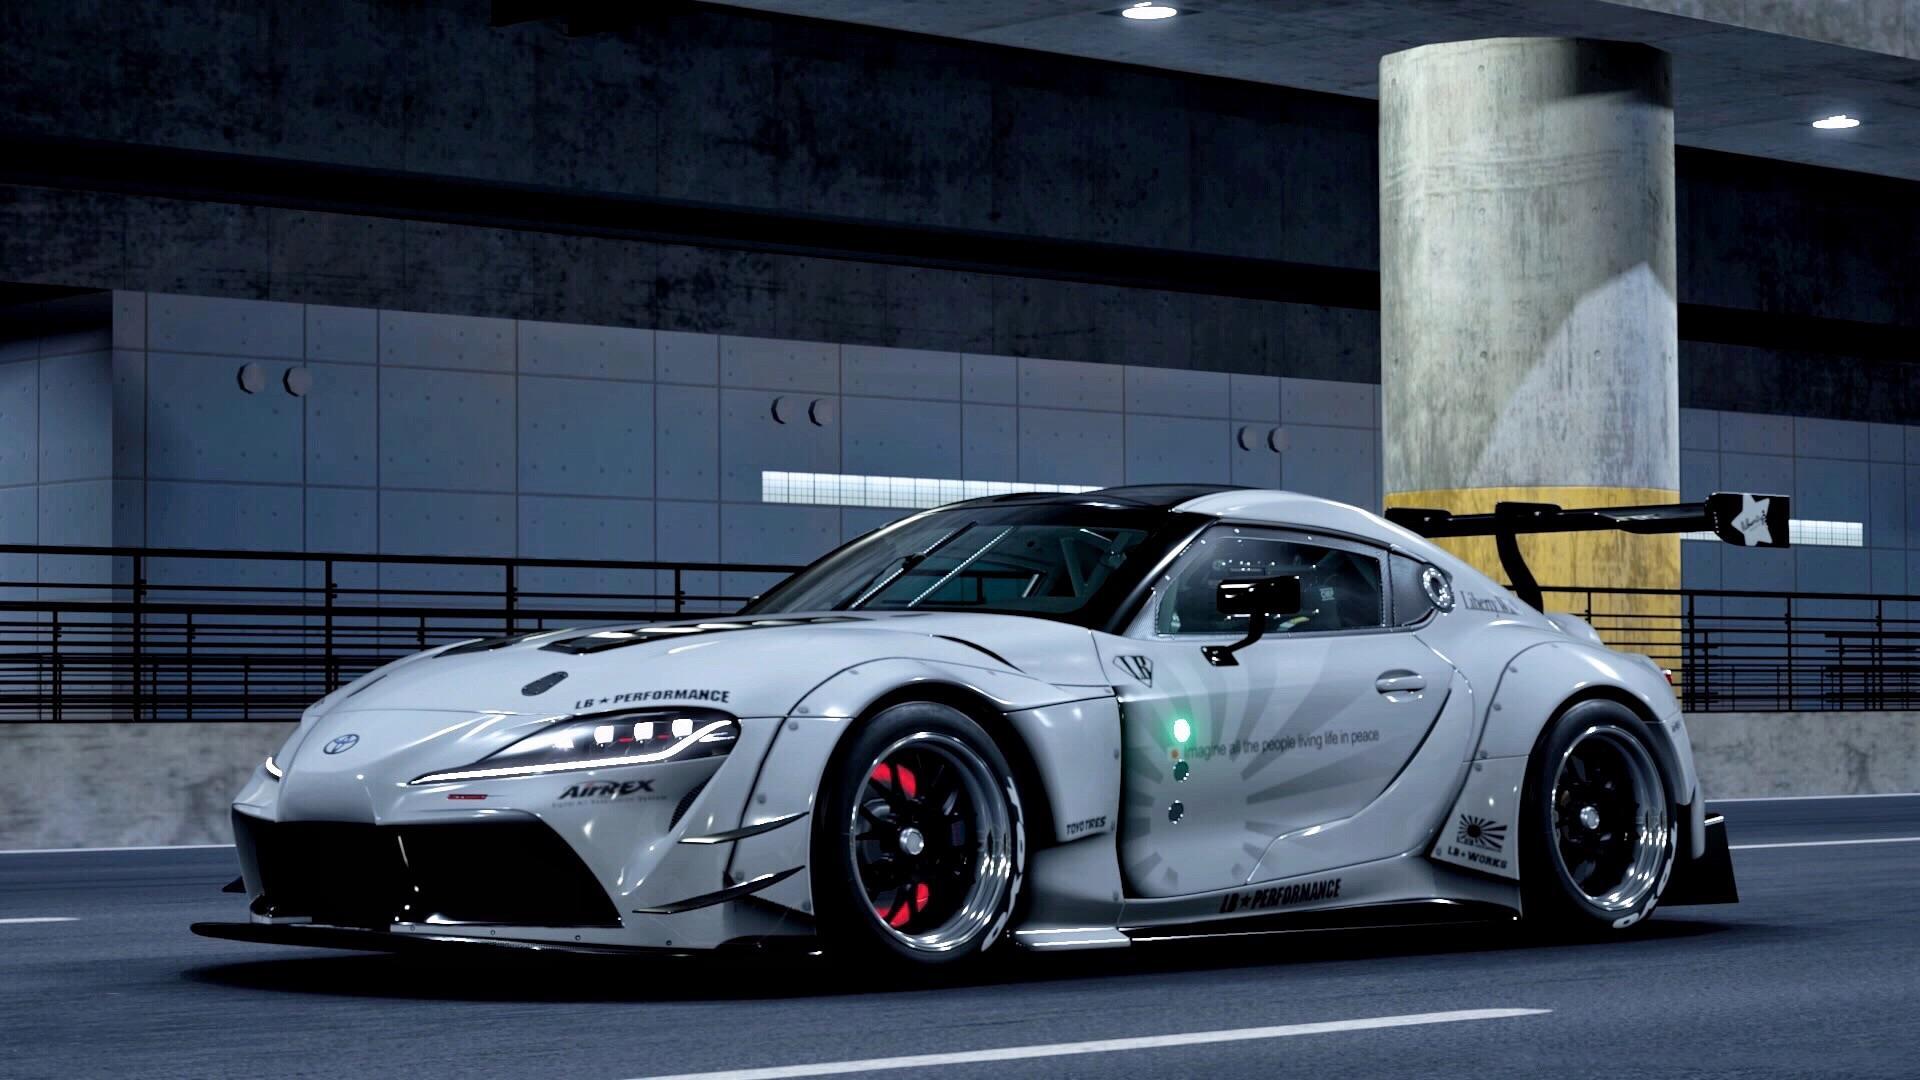 What are your thoughts on the 2020 Supra?